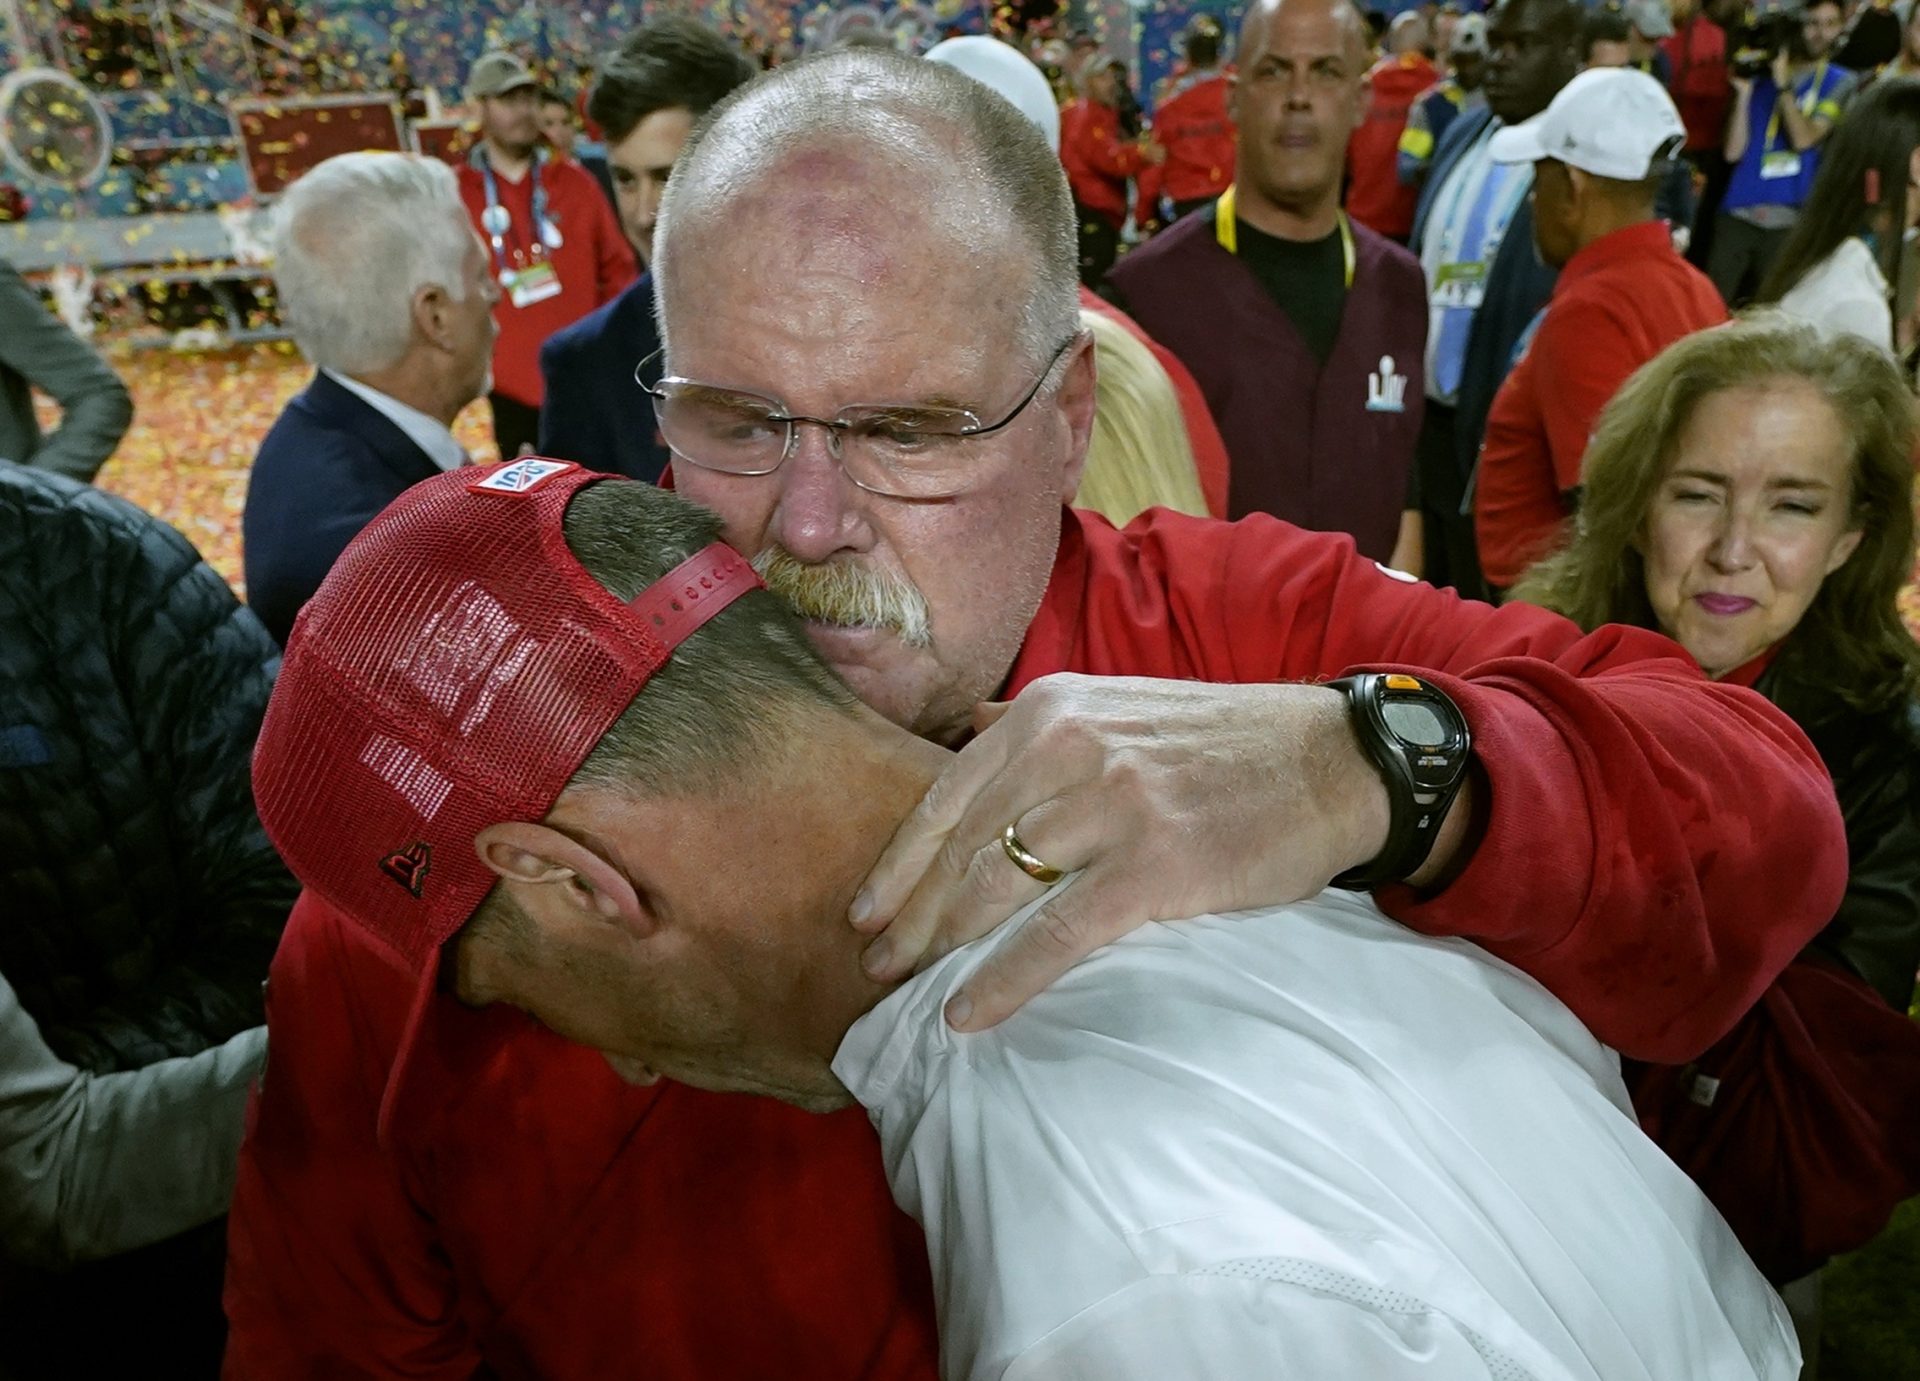 Kansas City Chiefs head coach Andy Reid, rear, puts his arm around San Francisco 49ers head coach Kyle Shanahan after the Chiefs defeated the 49ers in the NFL Super Bowl 54 football game Sunday, Feb. 2, 2020, in Miami Gardens, Fla.